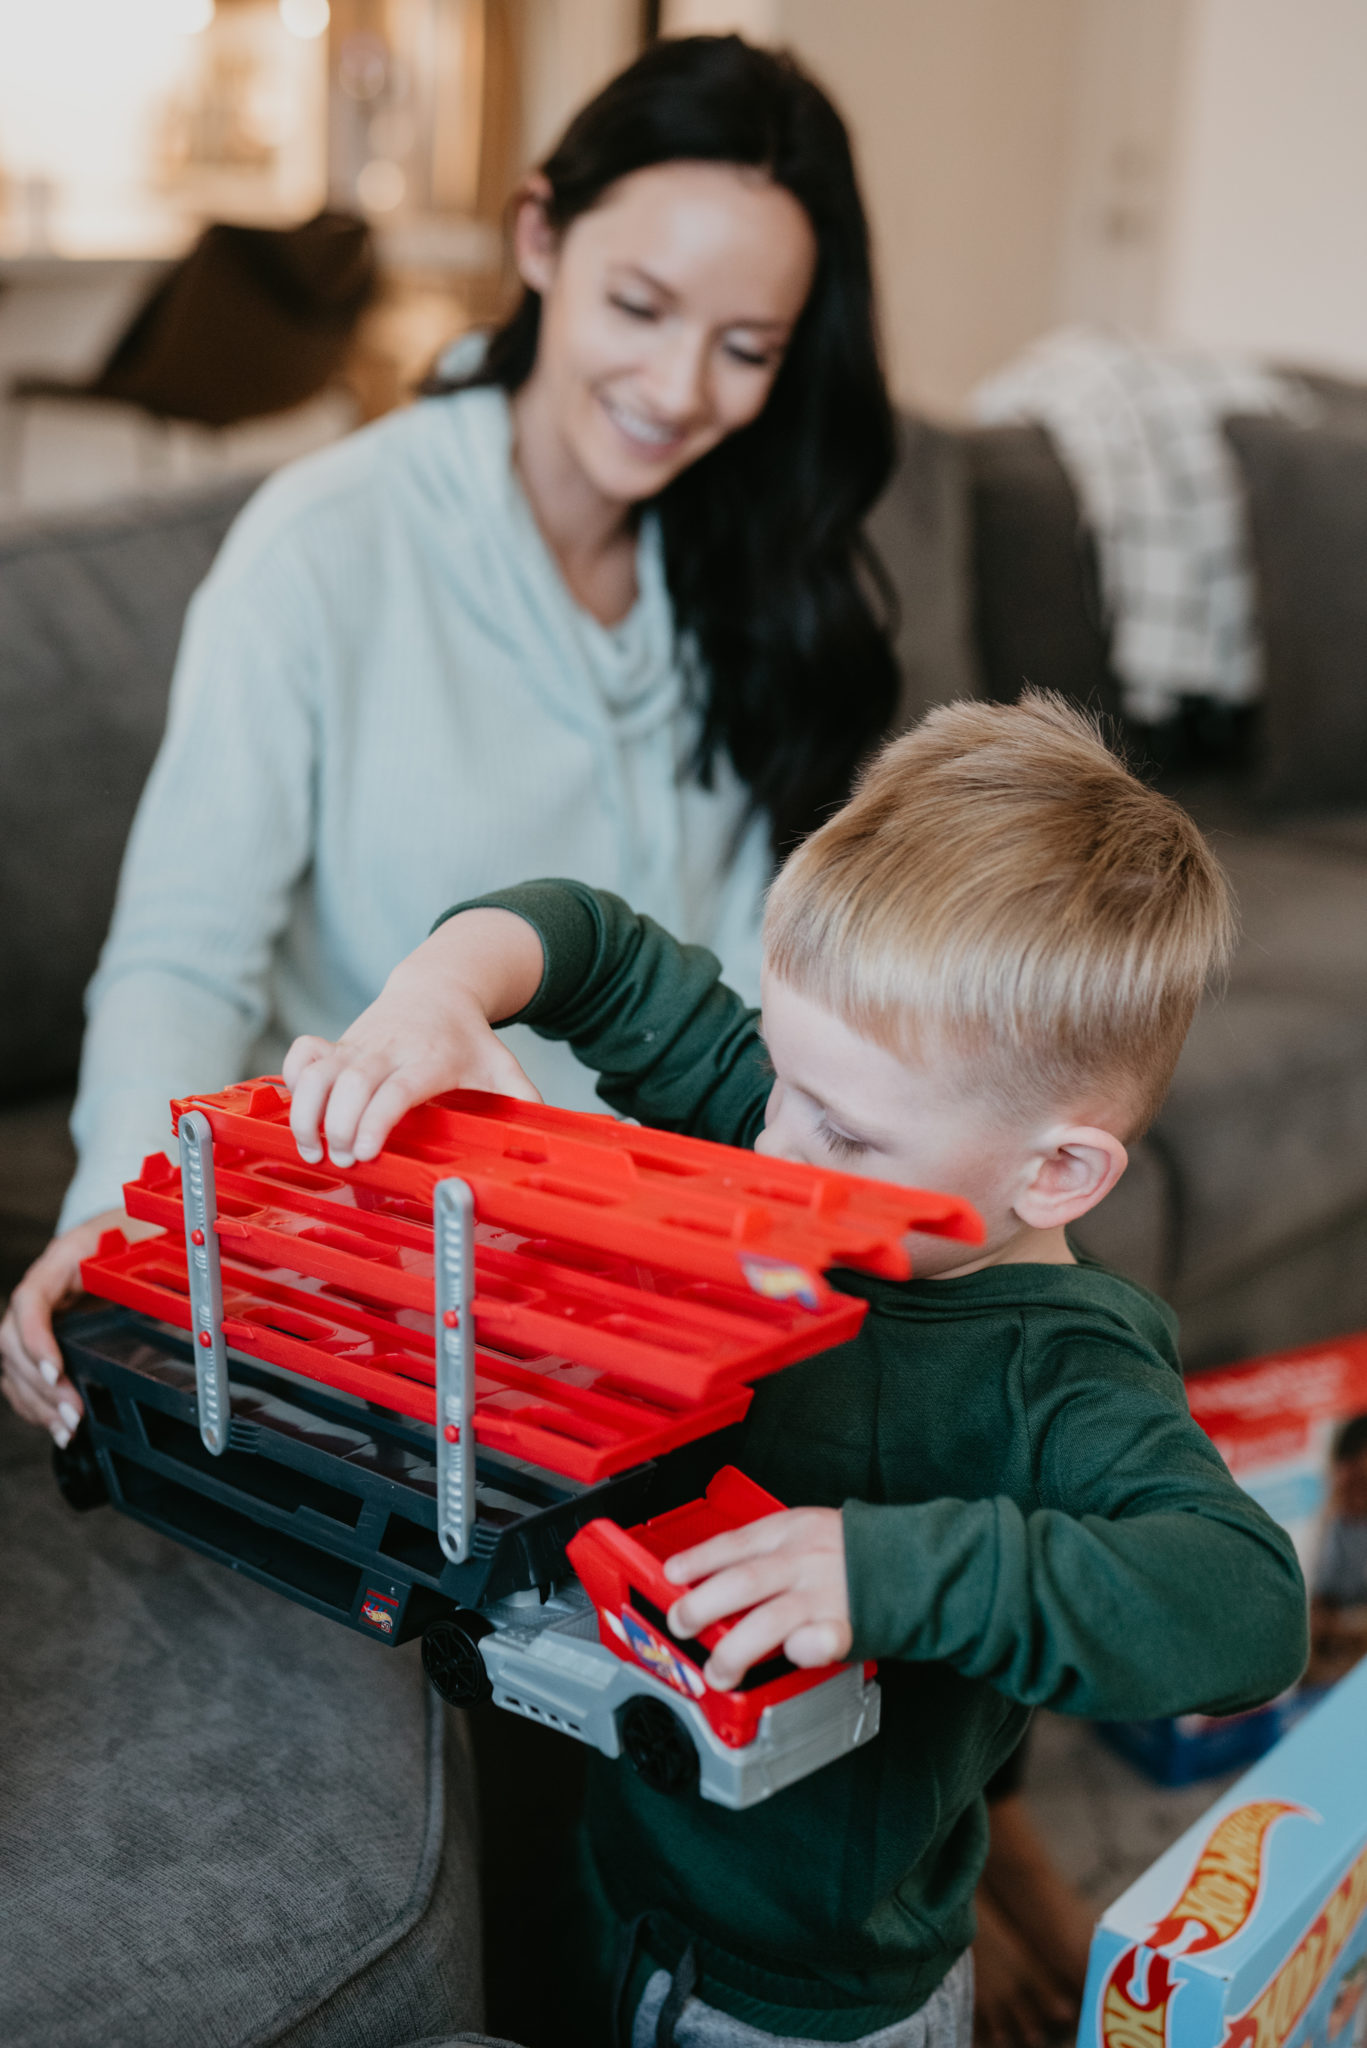 Top Kohl's Gifts for Kids featured by top Las Vegas life and style blog, Outfits & Outings: picture of a boy looking at his Kohls gifts with his mom